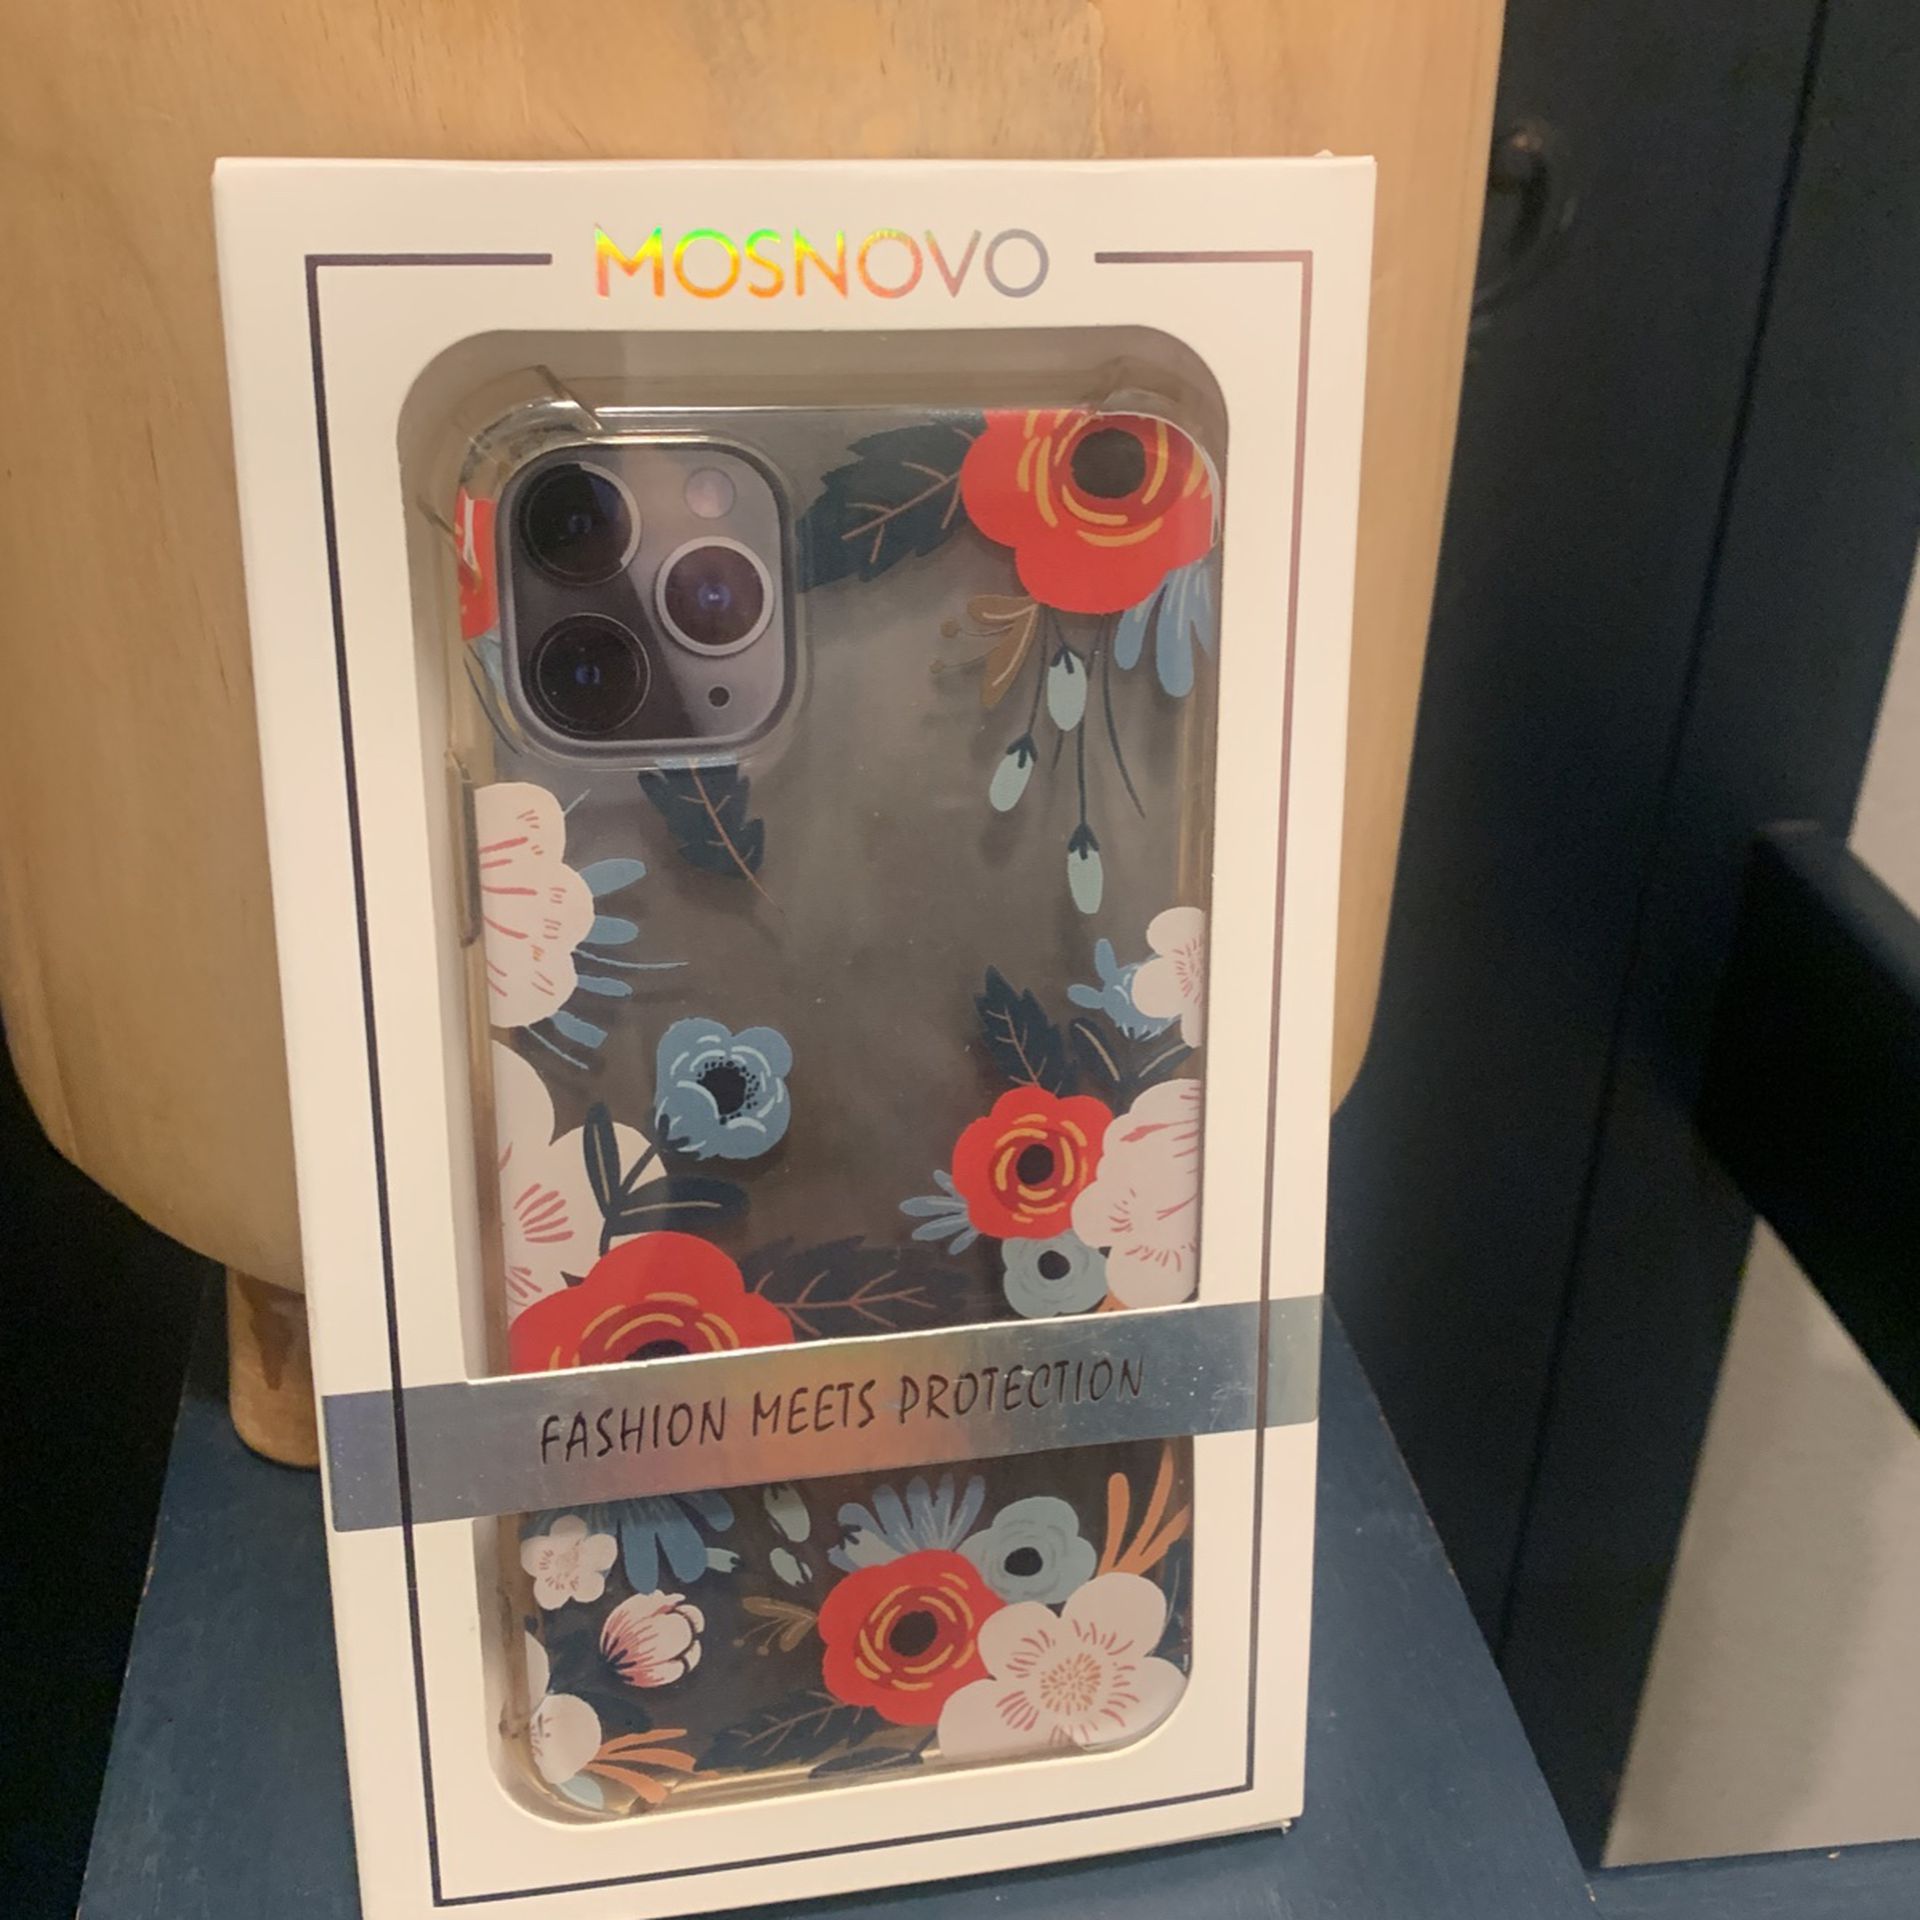 Floral I-Phone Cover